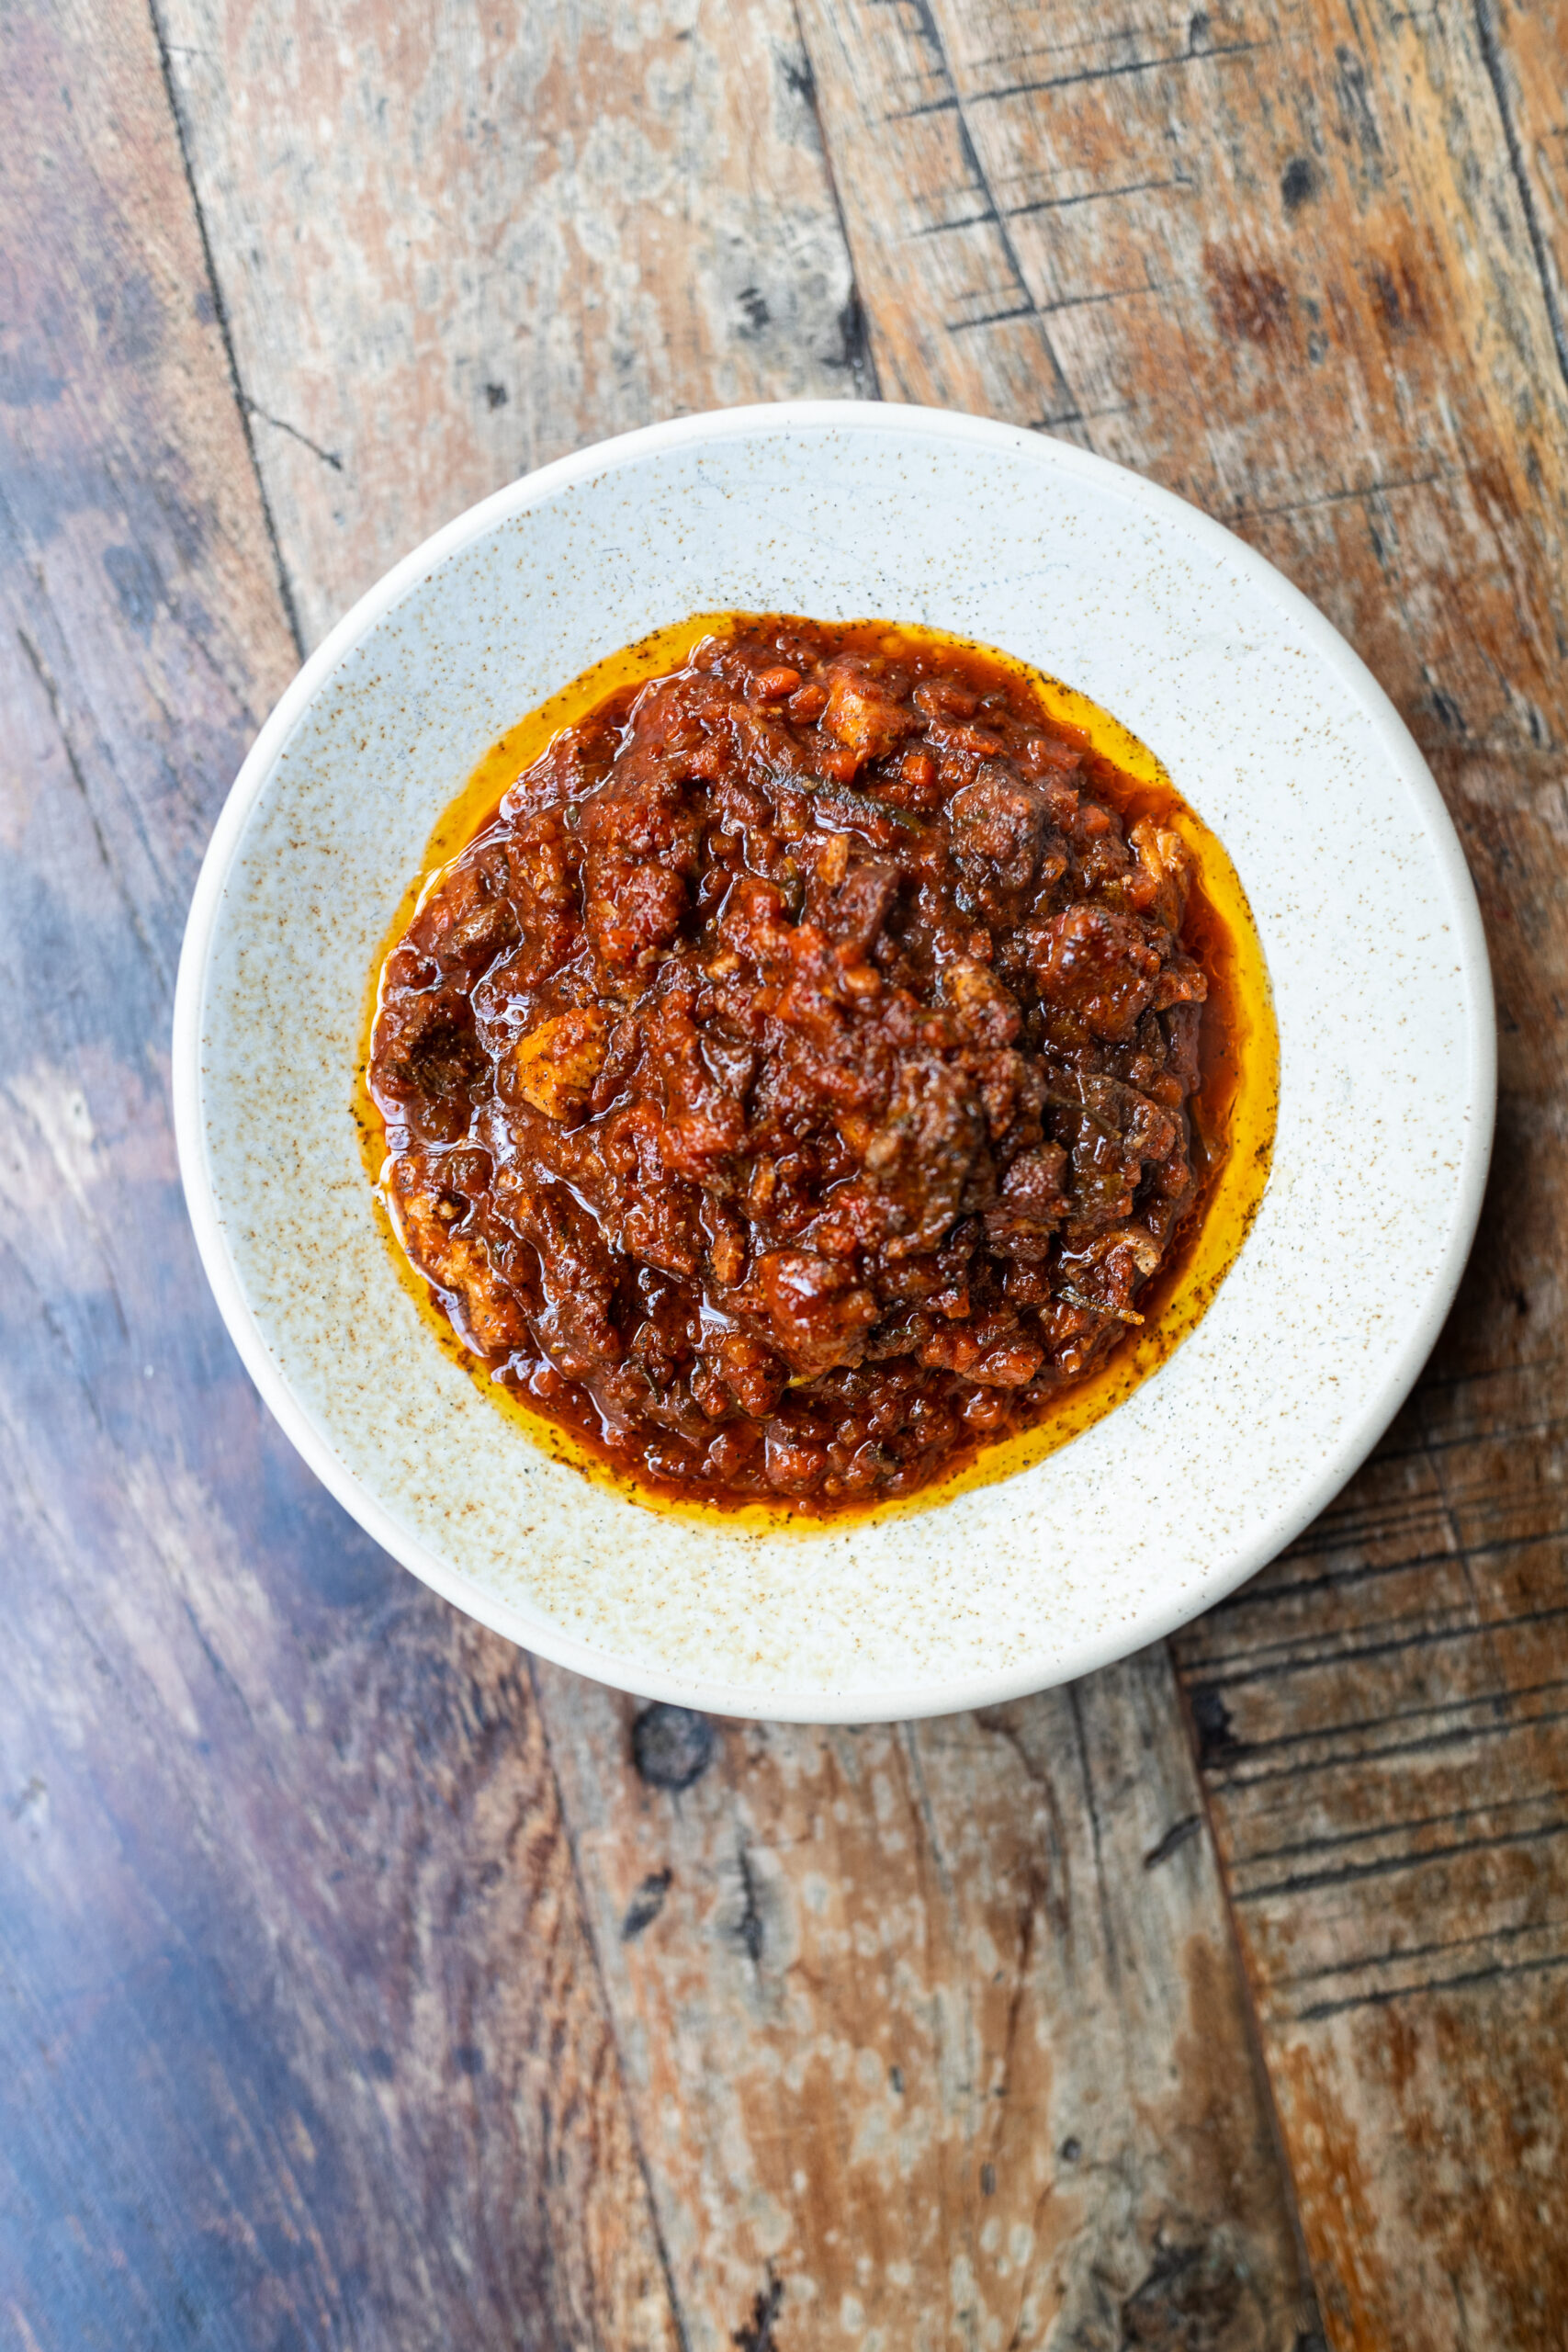 Overhead shot of pork and beef ragu in a white bowl on a wooden table